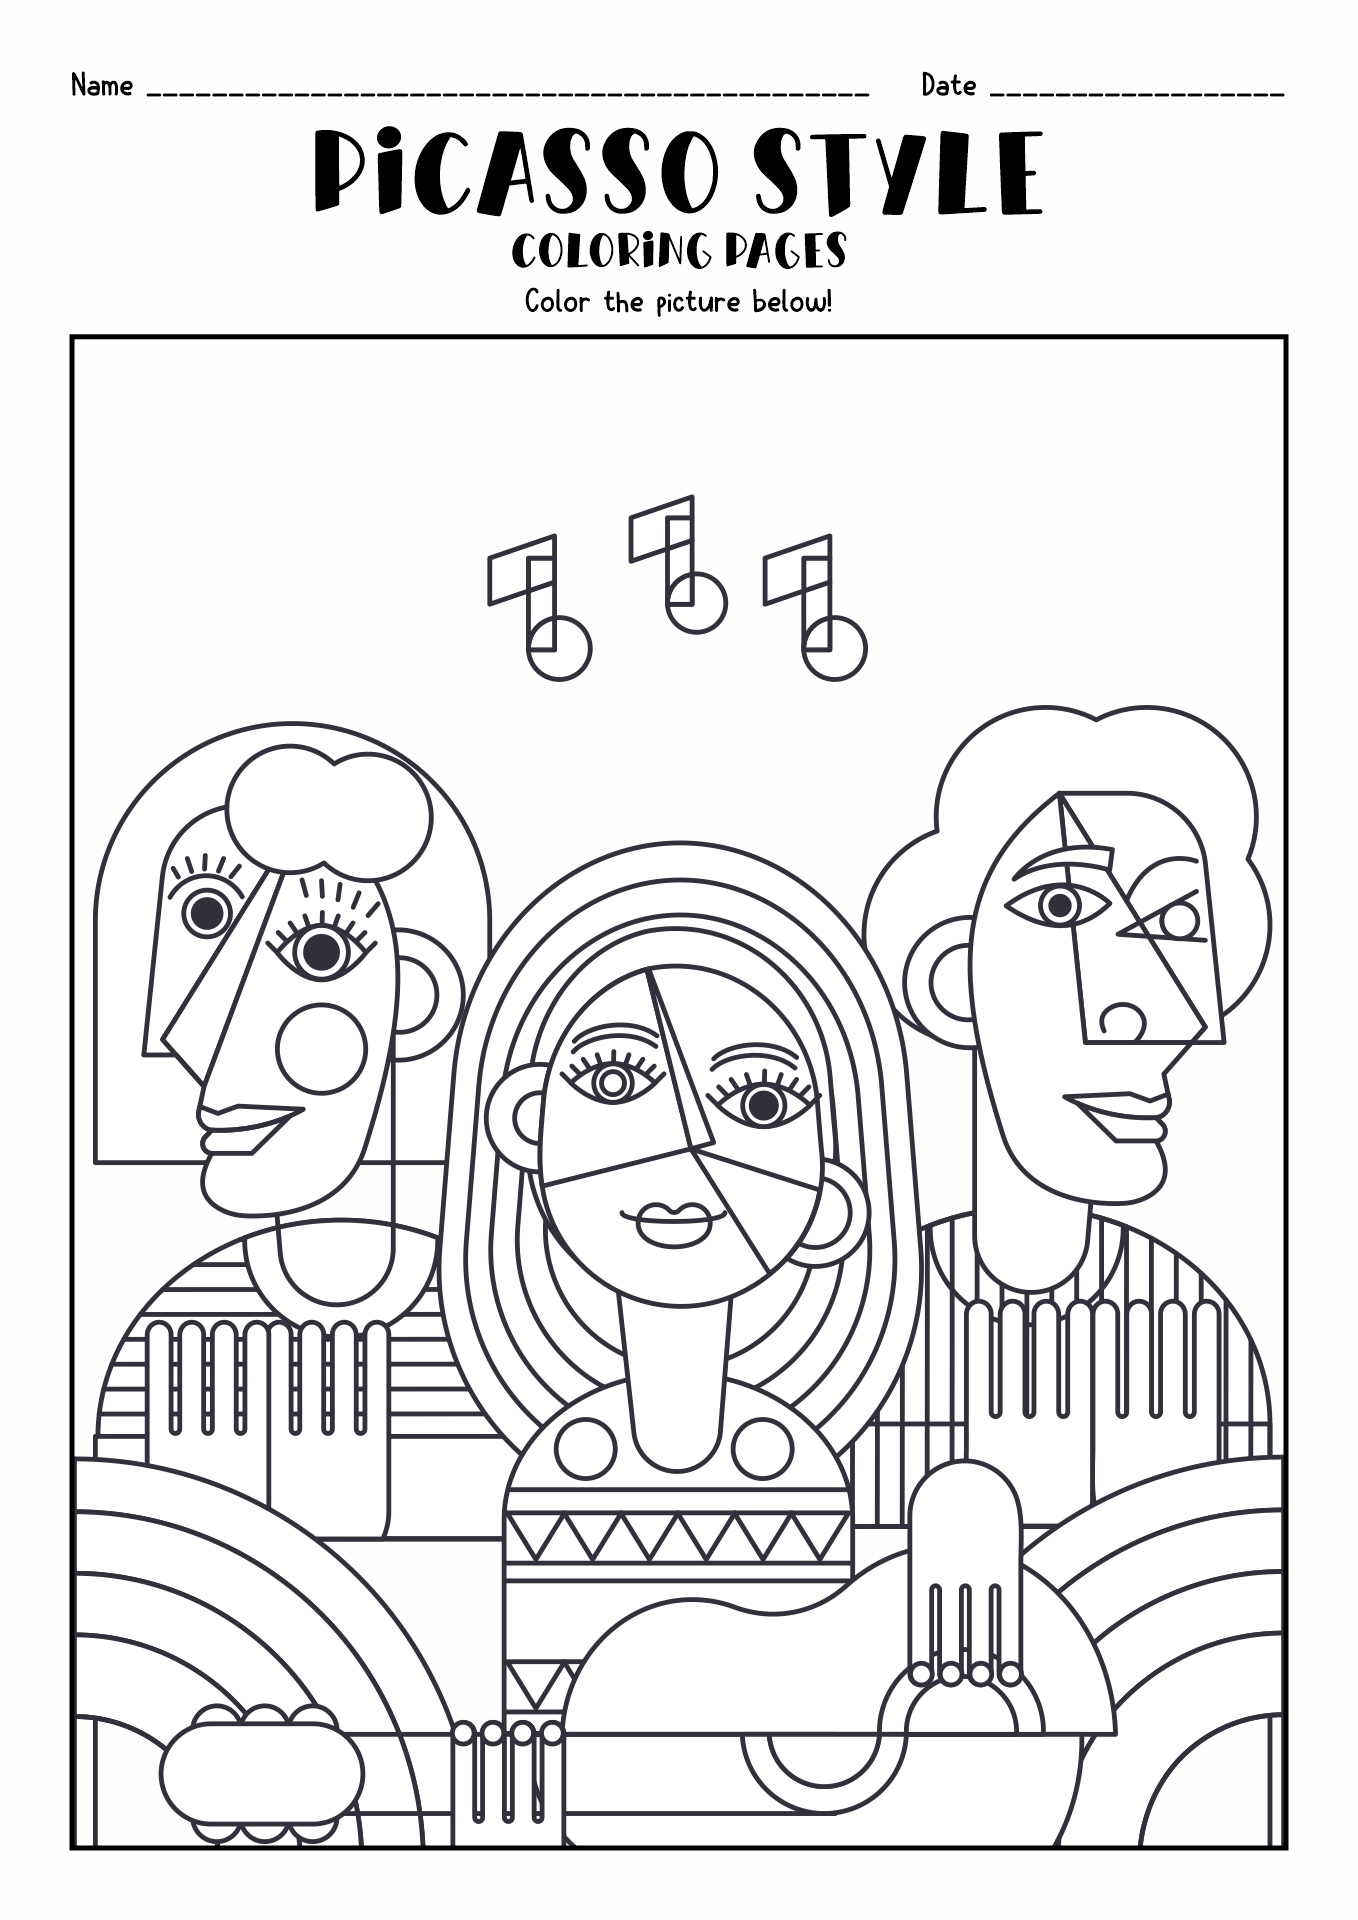 Picasso Faces Coloring Pages Image